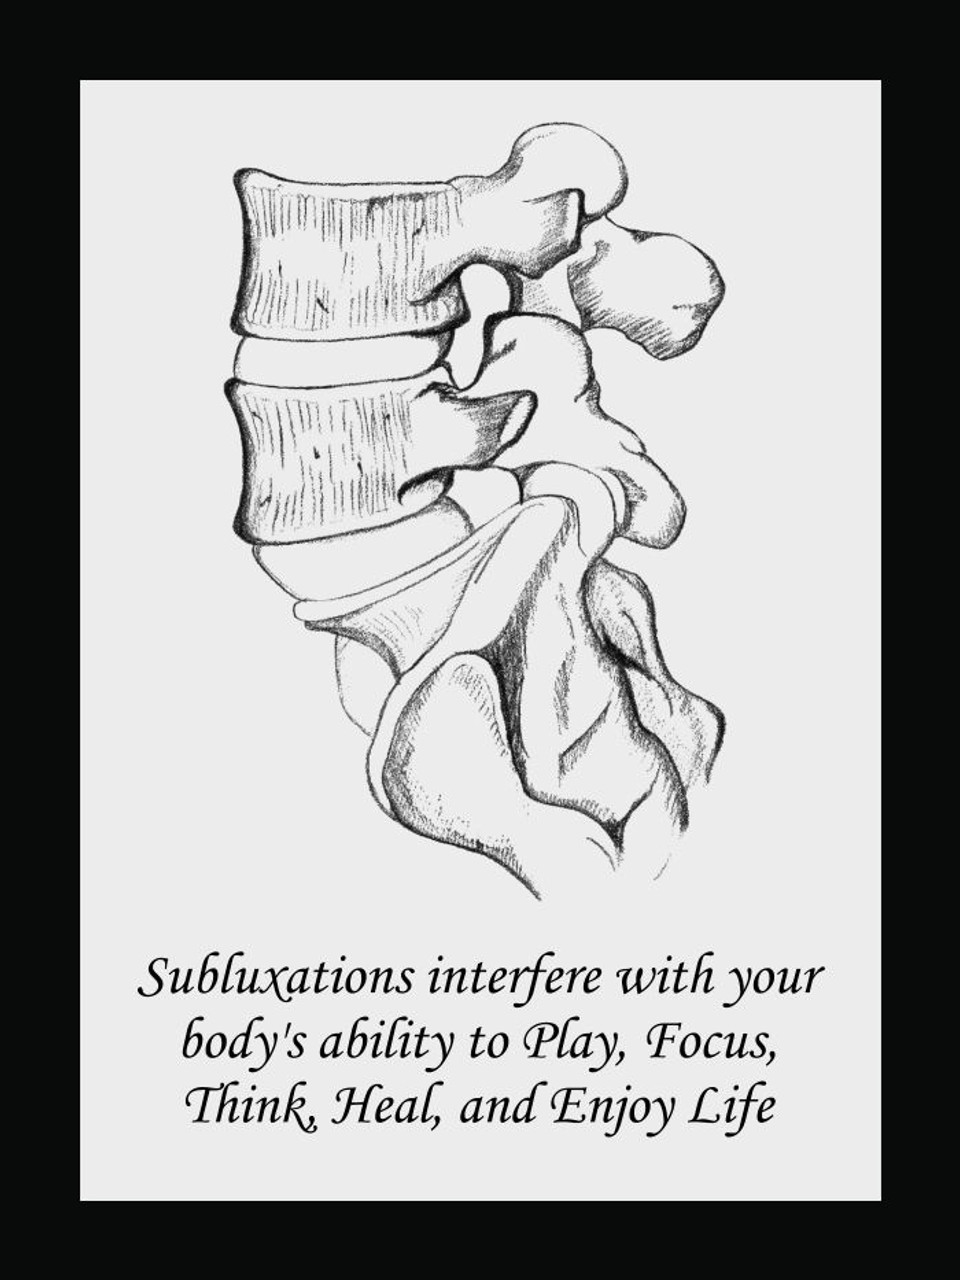 Chiropractic Posters And Charts